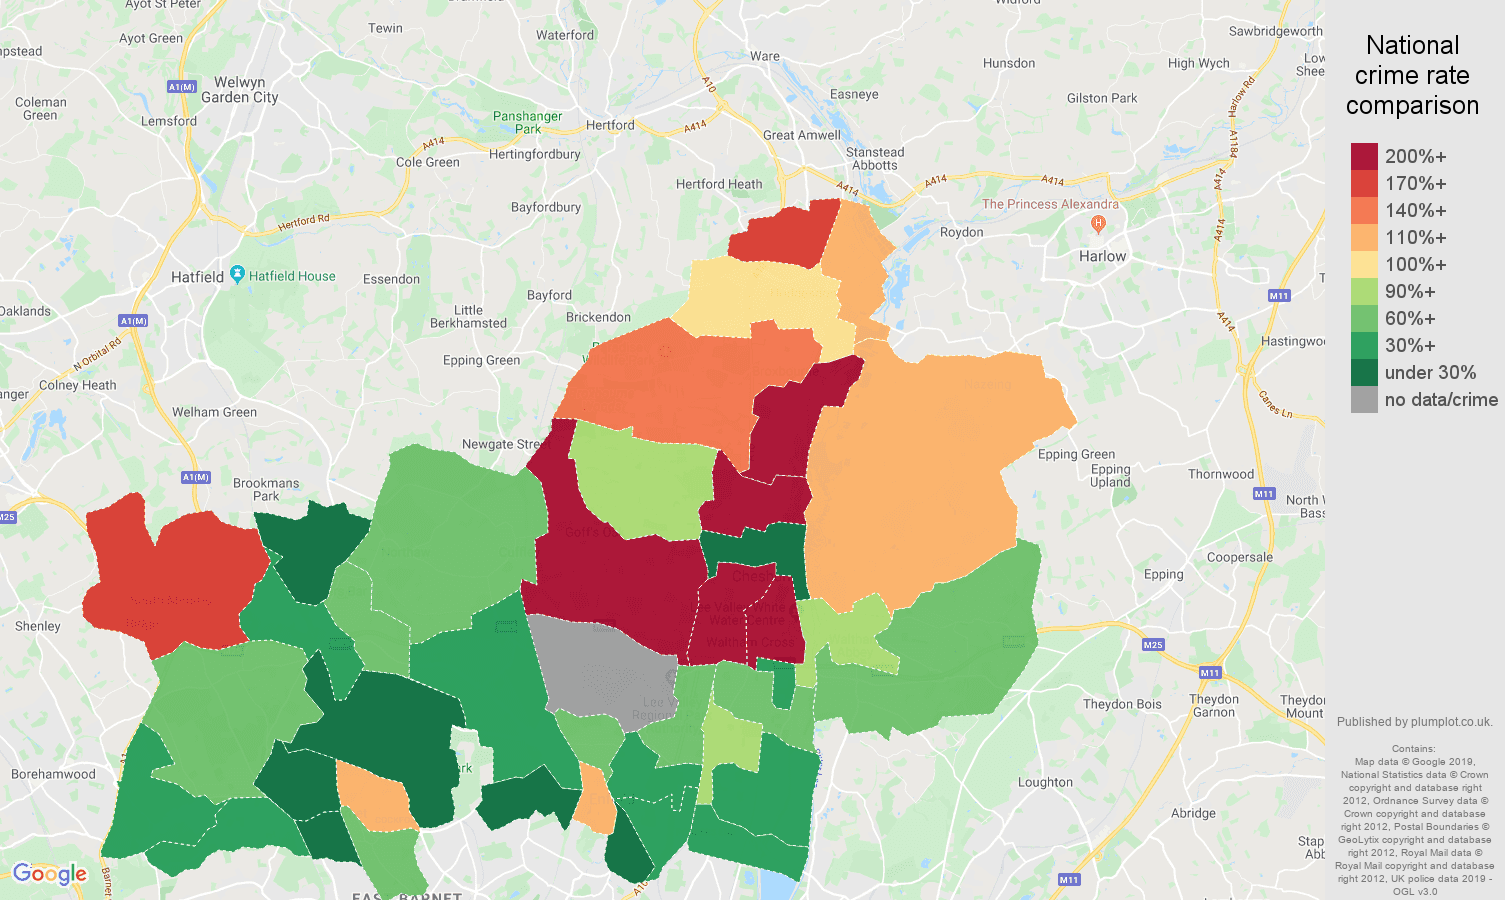 Enfield other crime rate comparison map